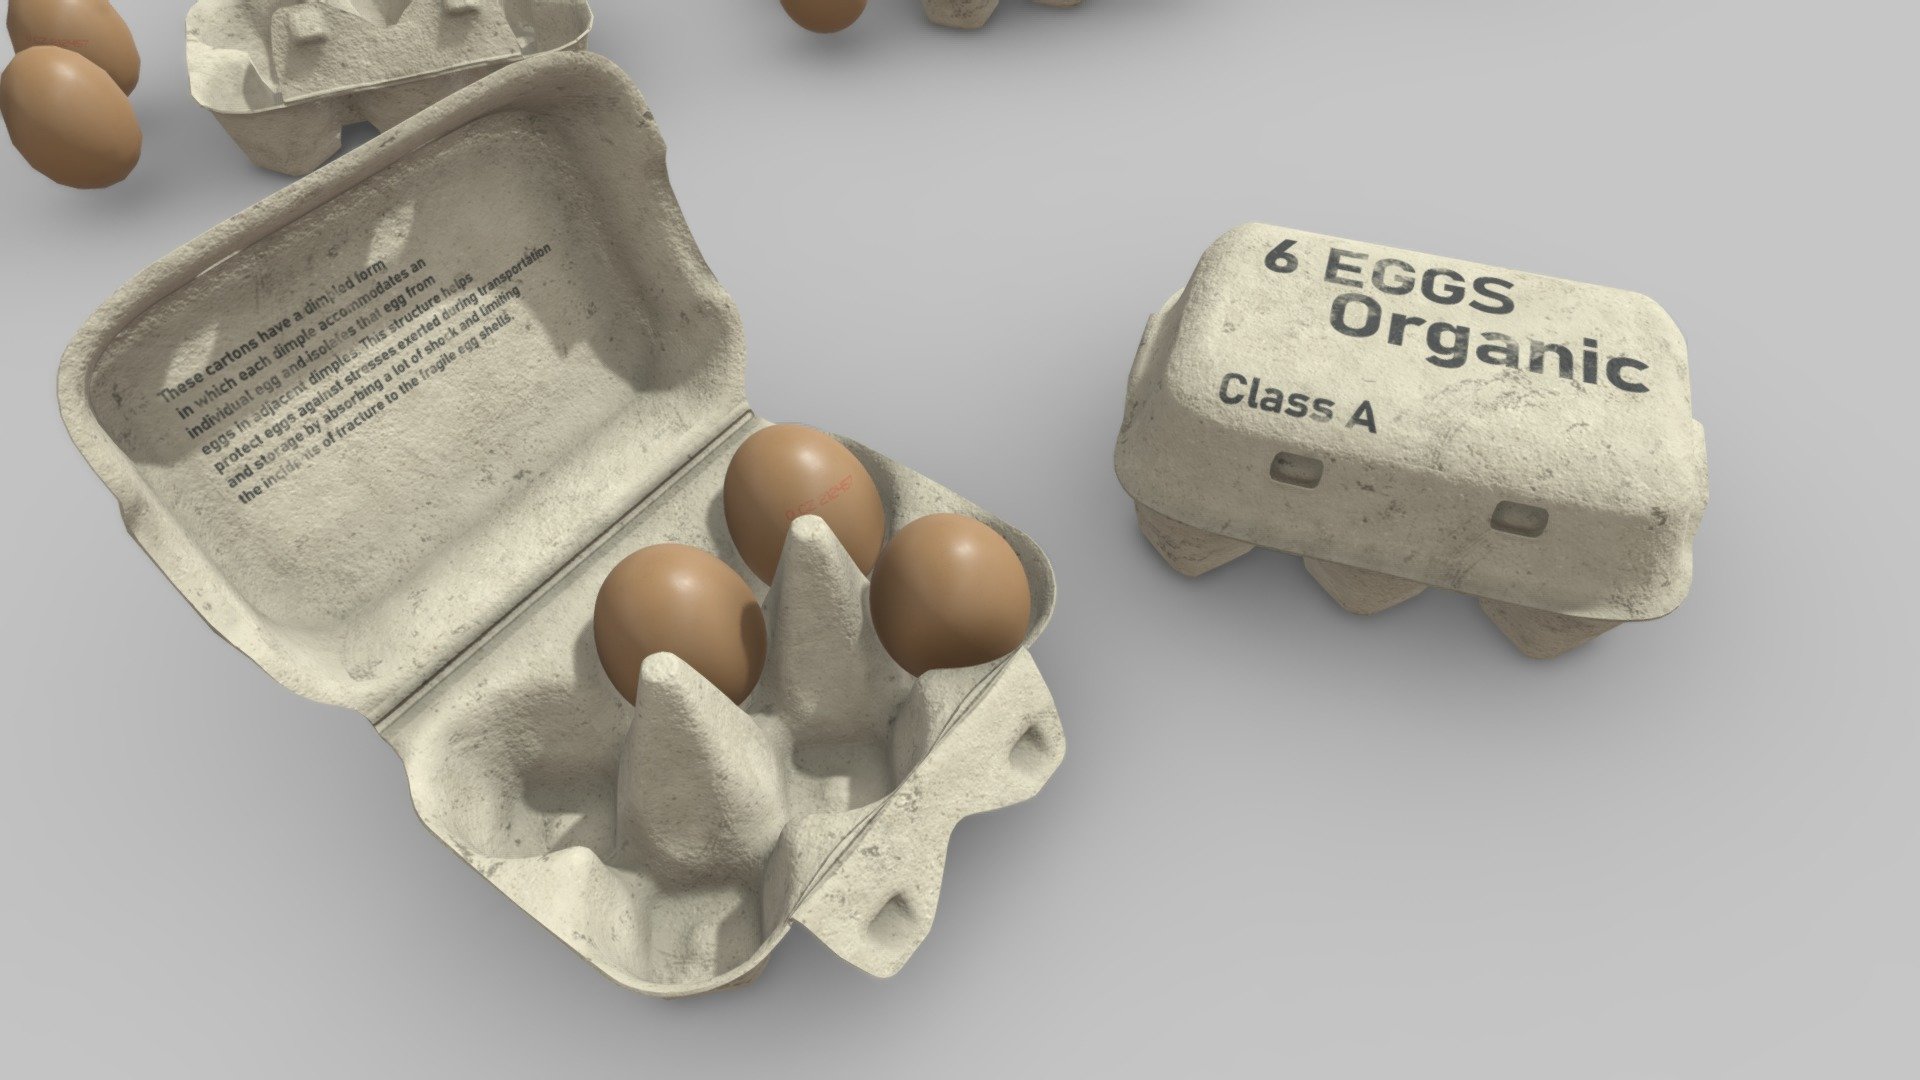 Egg carton for 6 eggs.
Real world scale and PBR materials.

Low and high poly version. Closed and opened cartons. 
Two different eggs (different code placement) for variation.

High poly: 
Has a 4K carton texture and a 2K egg texture.
Carton has 12 789 verticies and 25 600 tris.
Egg has 1 538 verticies and 3 072 tris.

Low poly: 
Has a 2K carton texture and 1K egg texture.
Carton has 3 200 verticies and 6 404 tris.
Egg has 98 verticies and 192 tris 3d model